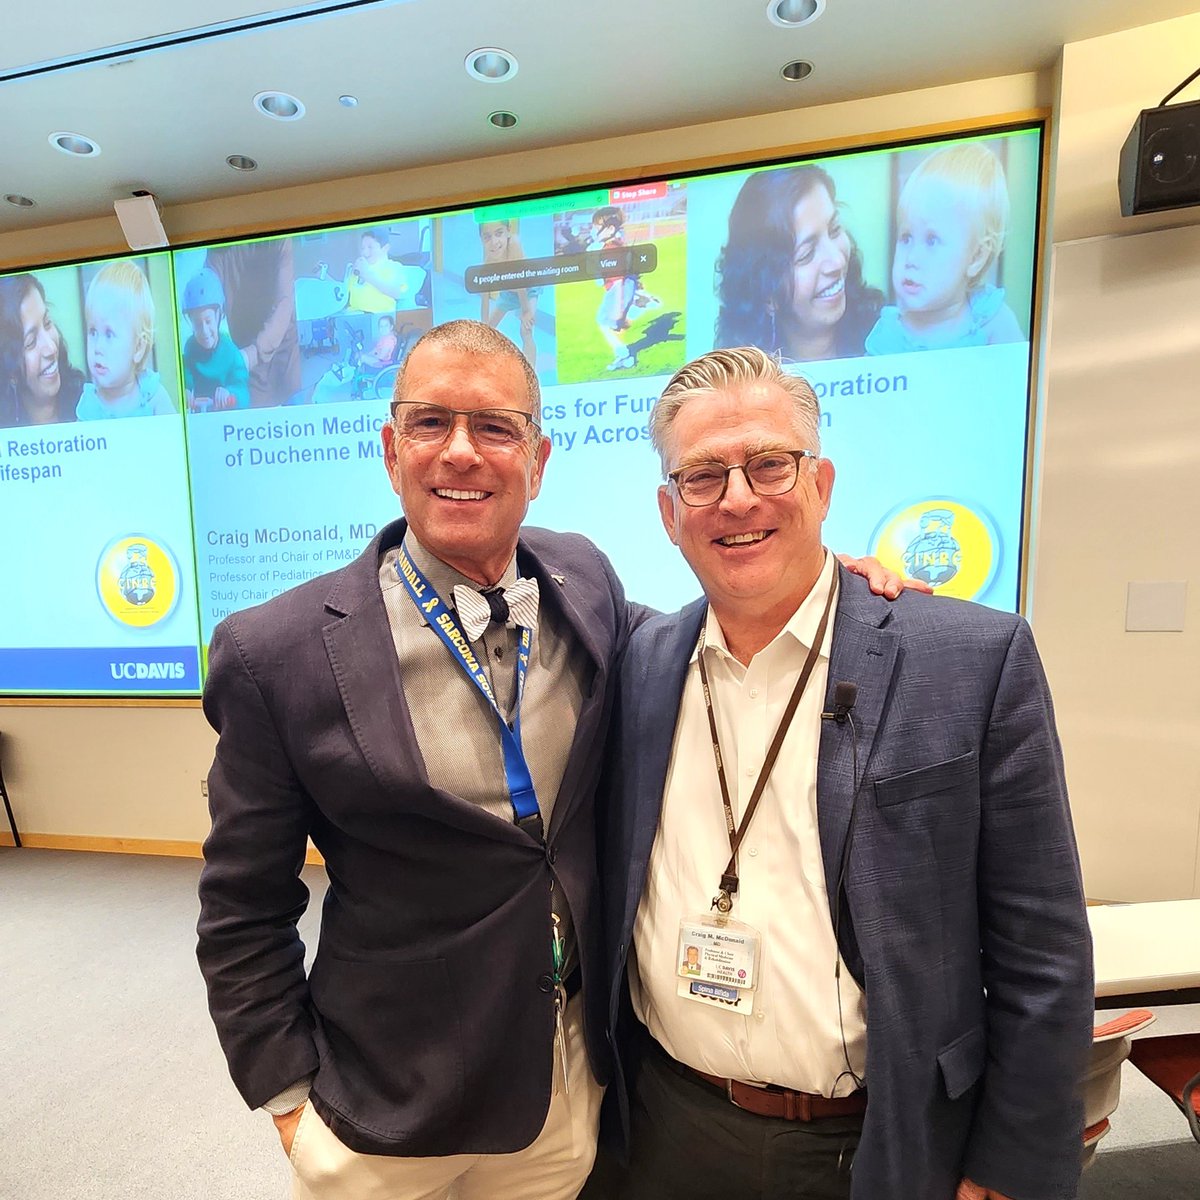 Dr. McDonald's talk on #genetherapy for Duchenne Muscular Dystrophy #DMD was remarkable. It is incredible to see the progress made in treating this rare genetic disorder, mostly affecting young boys. Kudos to his team for tireless efforts & contributions to a promising #FDAtrial.